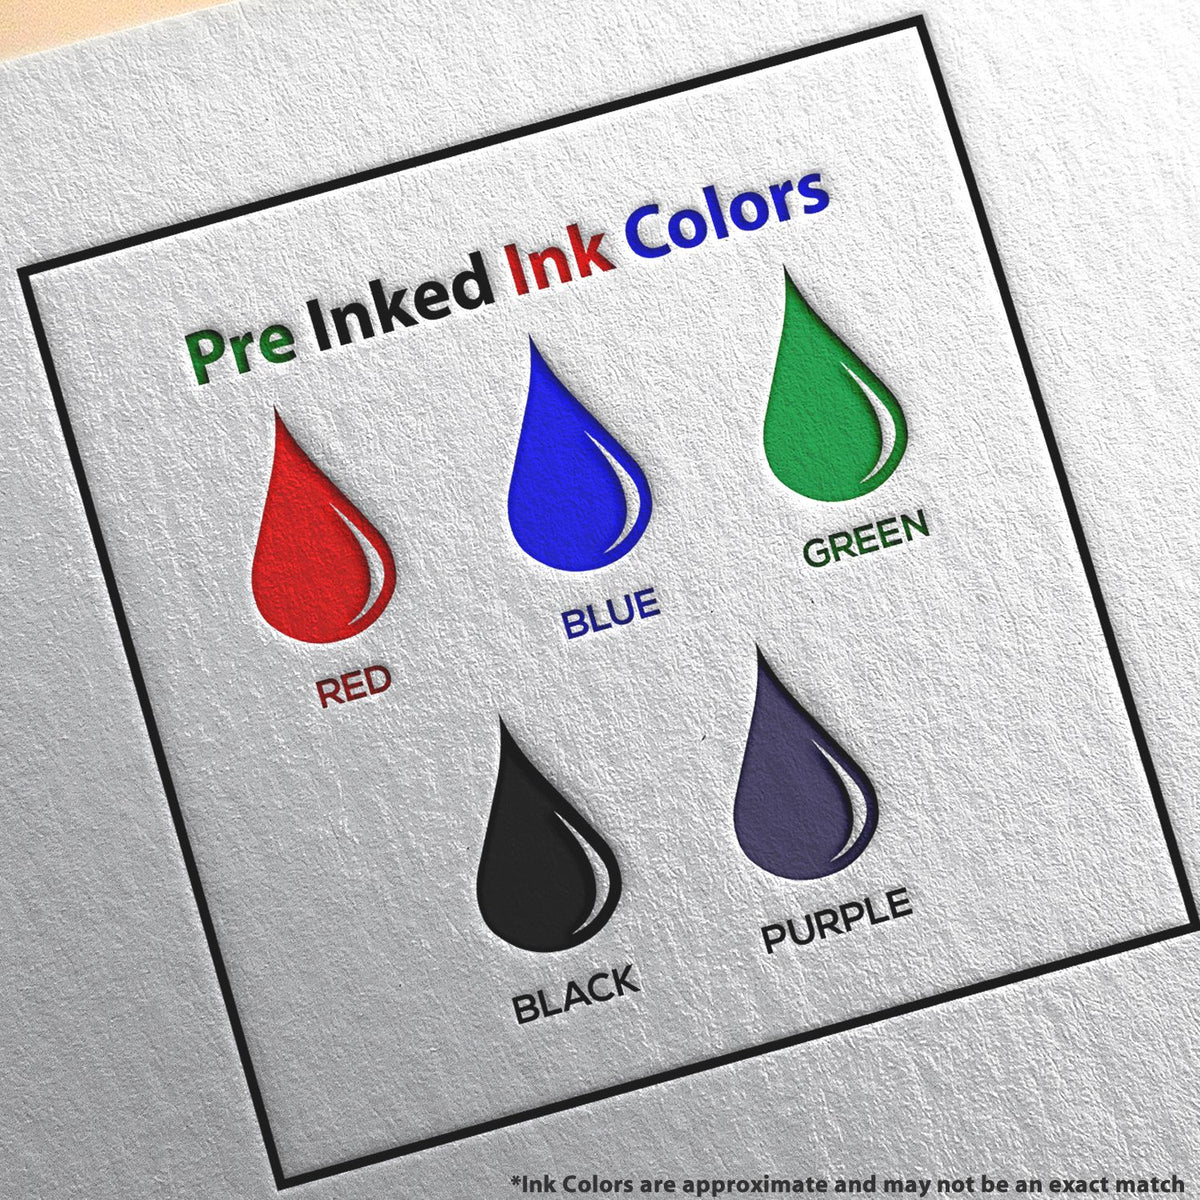 A picture showing the different ink colors or hues available for the Slim Pre-Inked Ohio Professional Engineer Seal Stamp product.